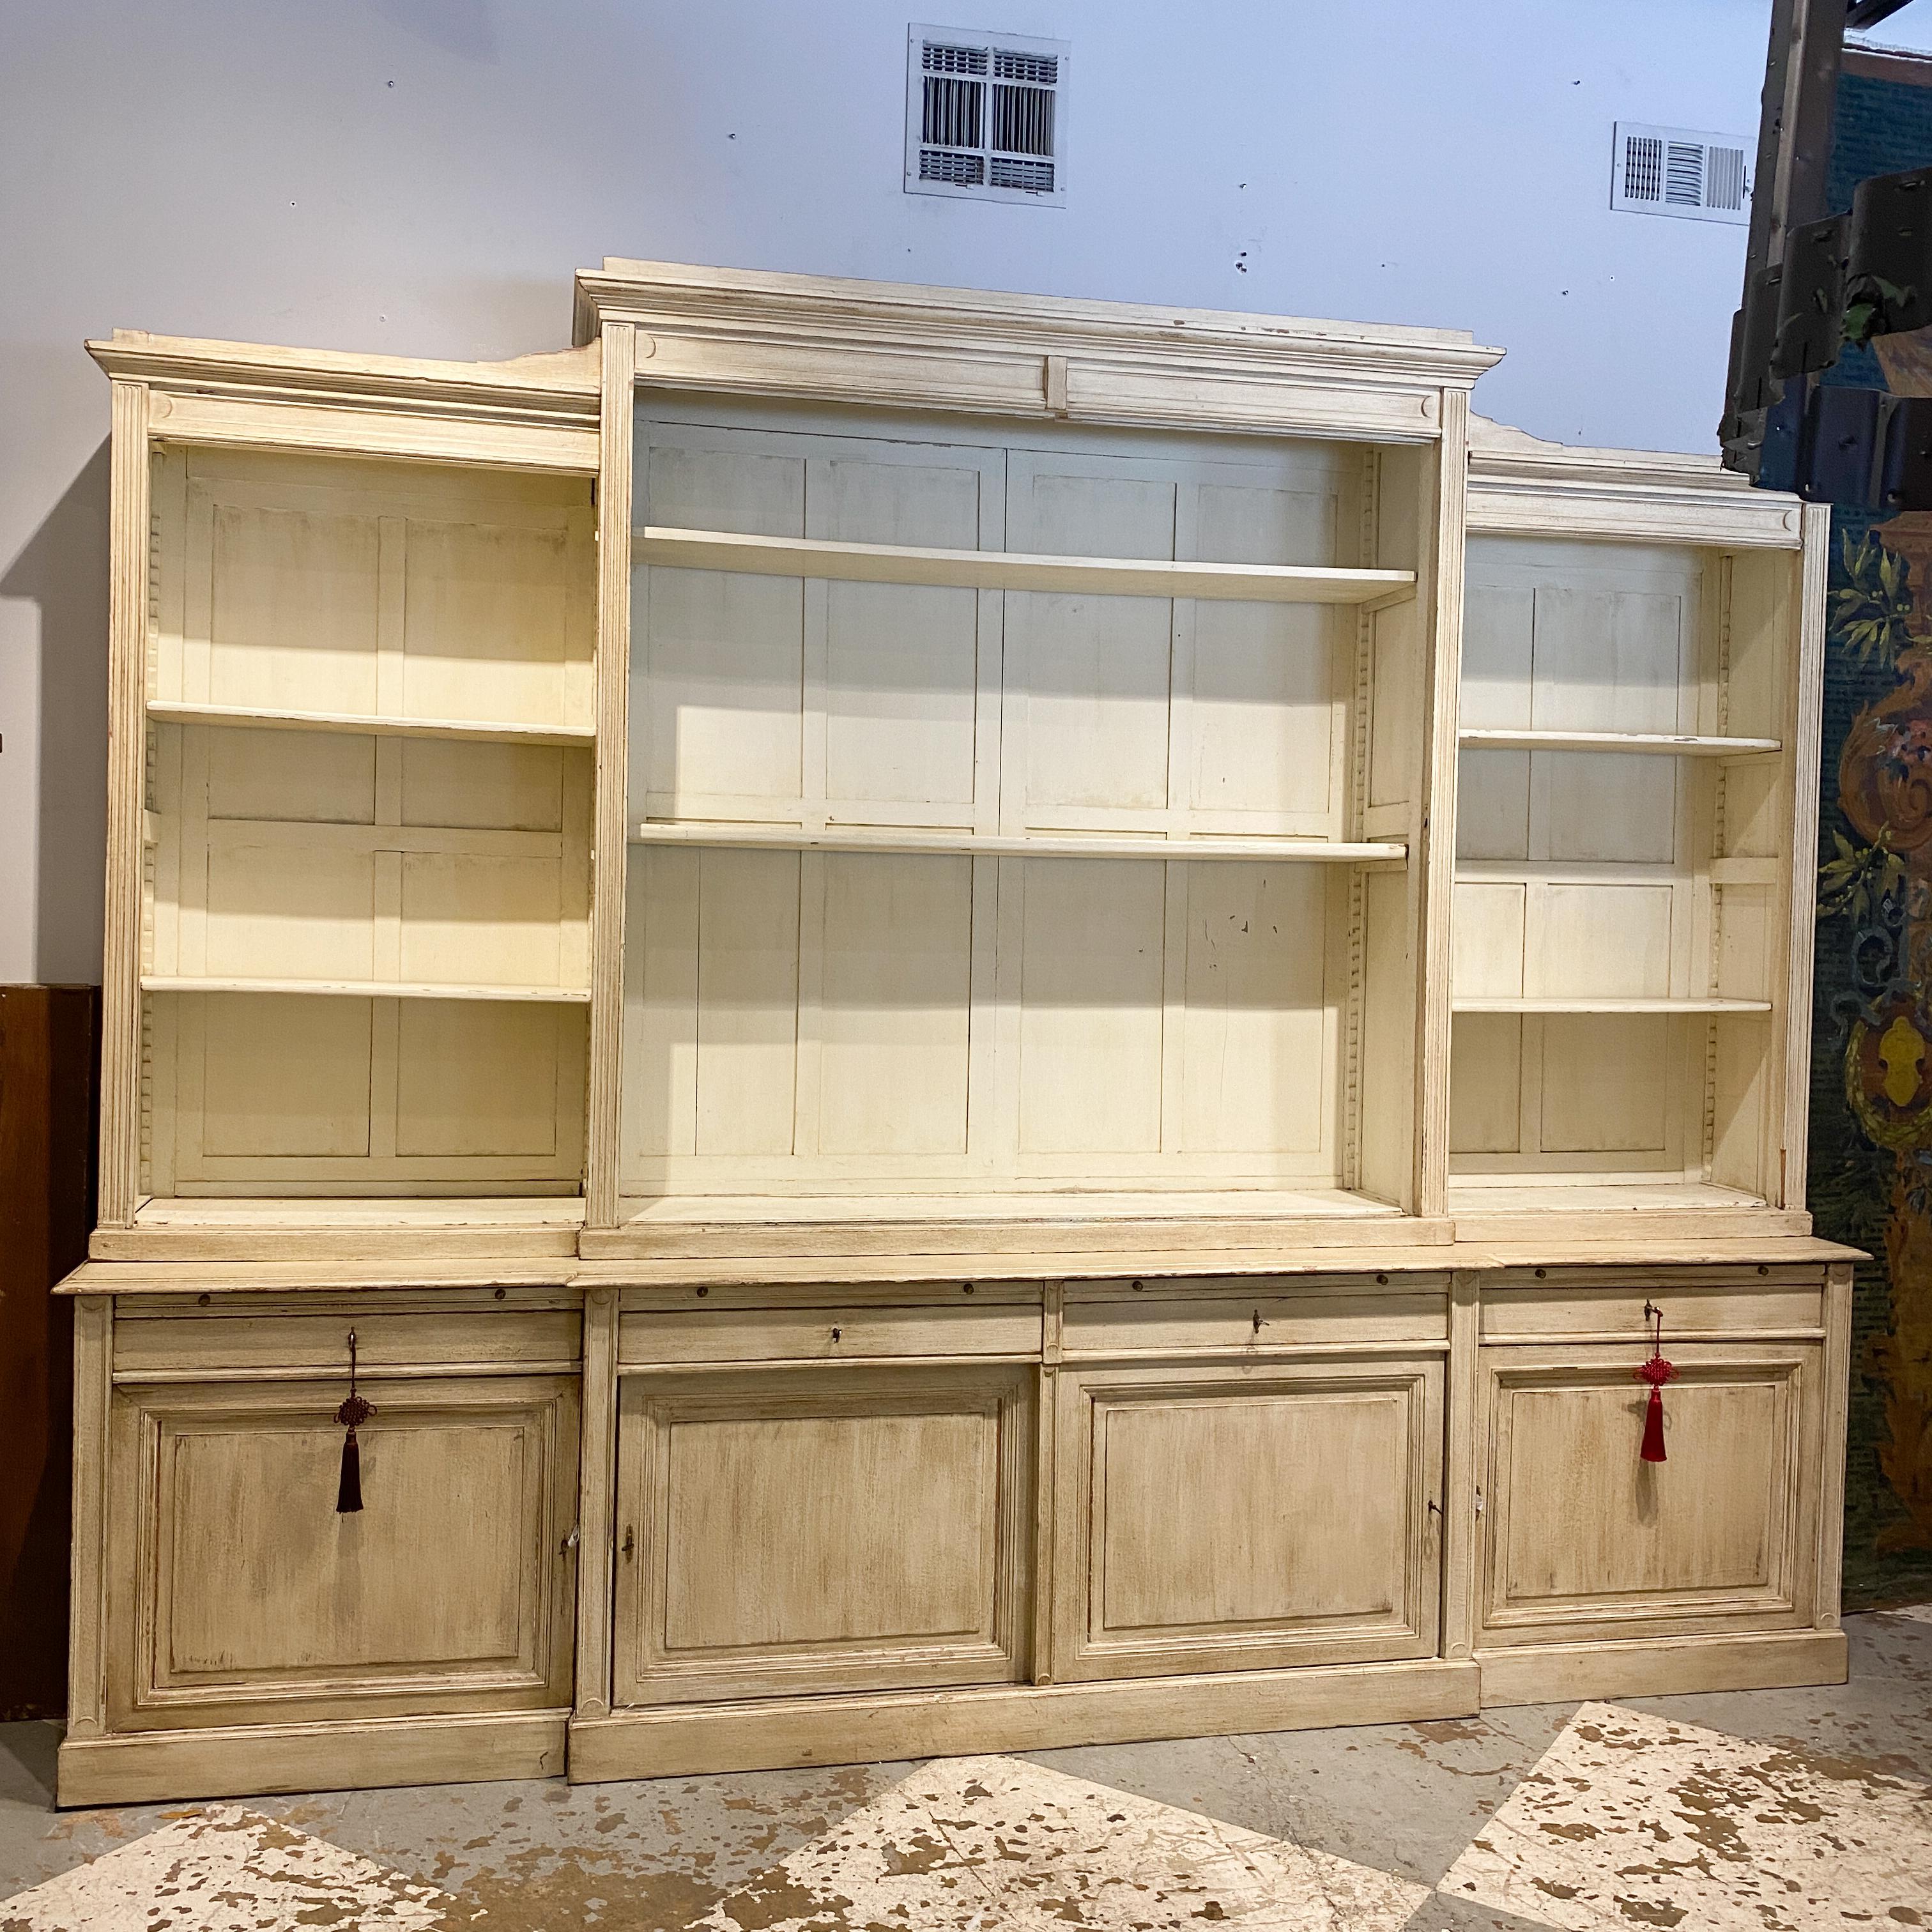 This is a large, antique oak Belgian display cabinet with ample storage and sliding glass doors, fabricated, circa 1910. The cabinet comes apart into multiple pieces and once assembled, appears to be one solid piece of furniture. In just the right